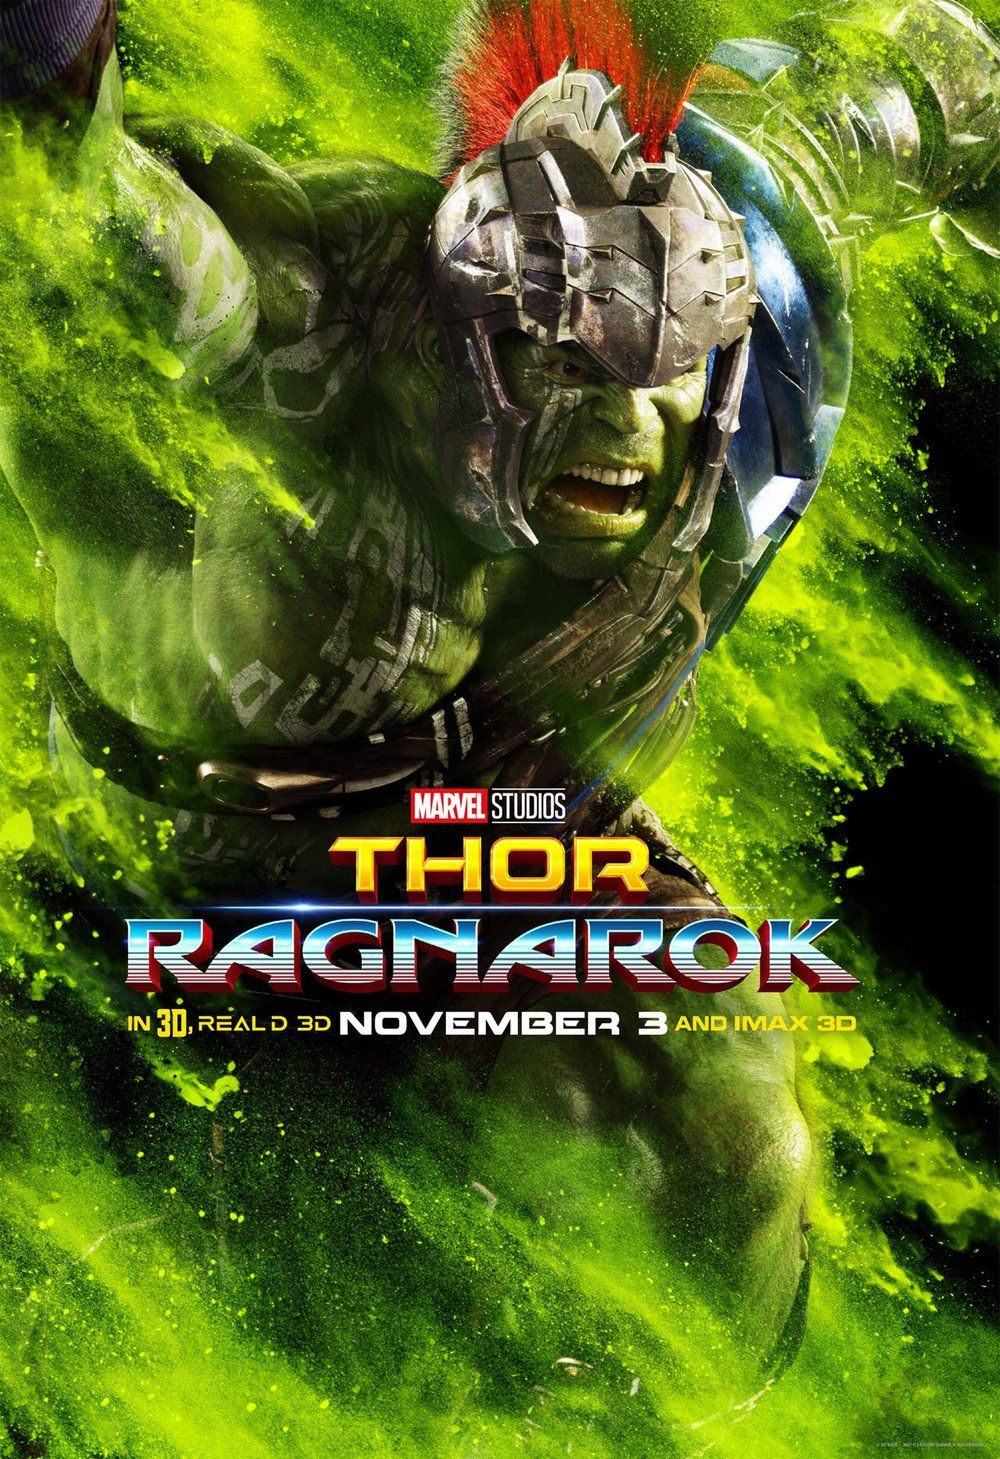 Thor: Ragnarok character posters